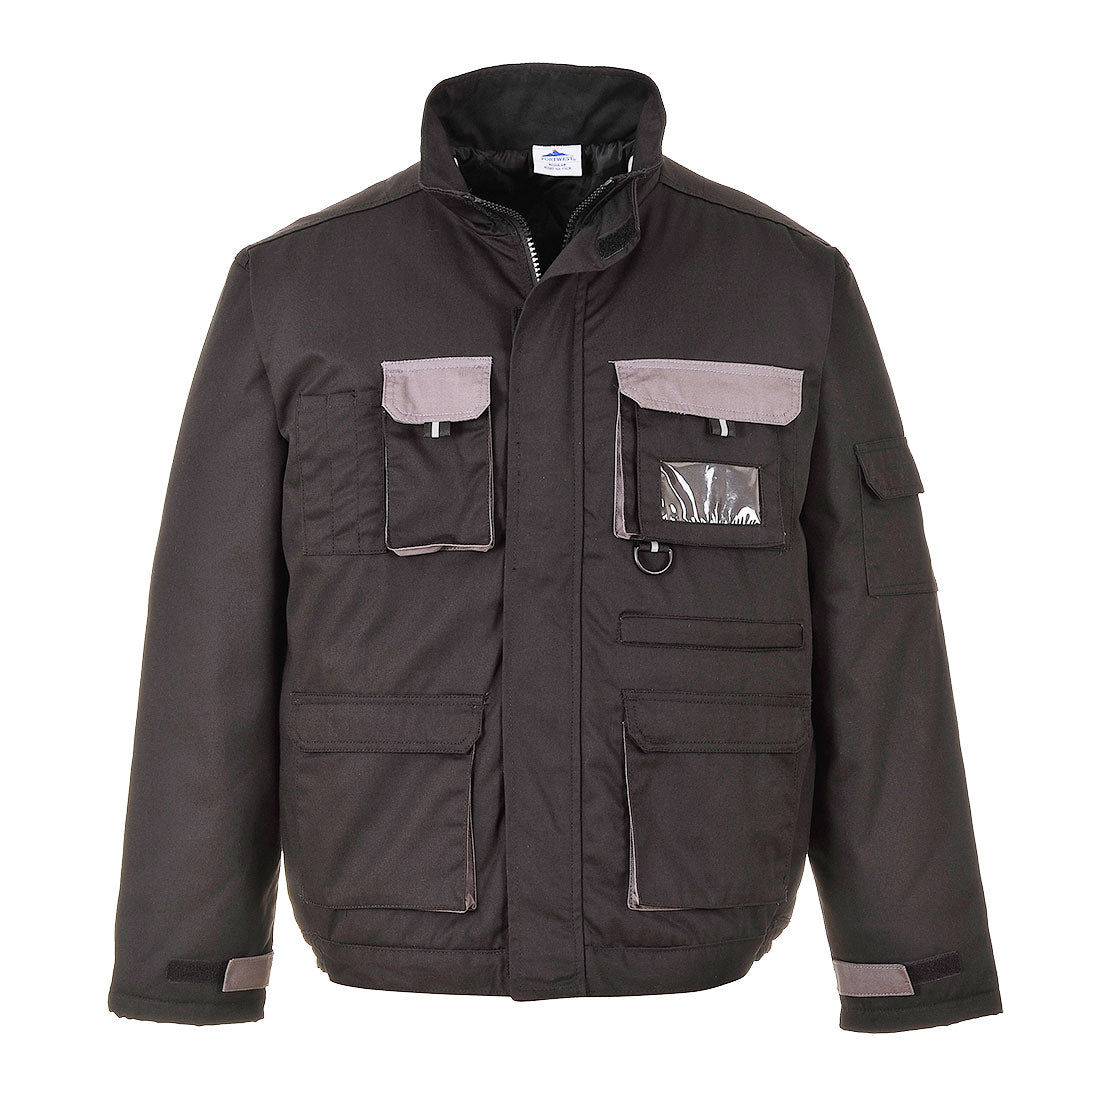 Portwest Texo Contrast Jacket - Lined  (TX18)